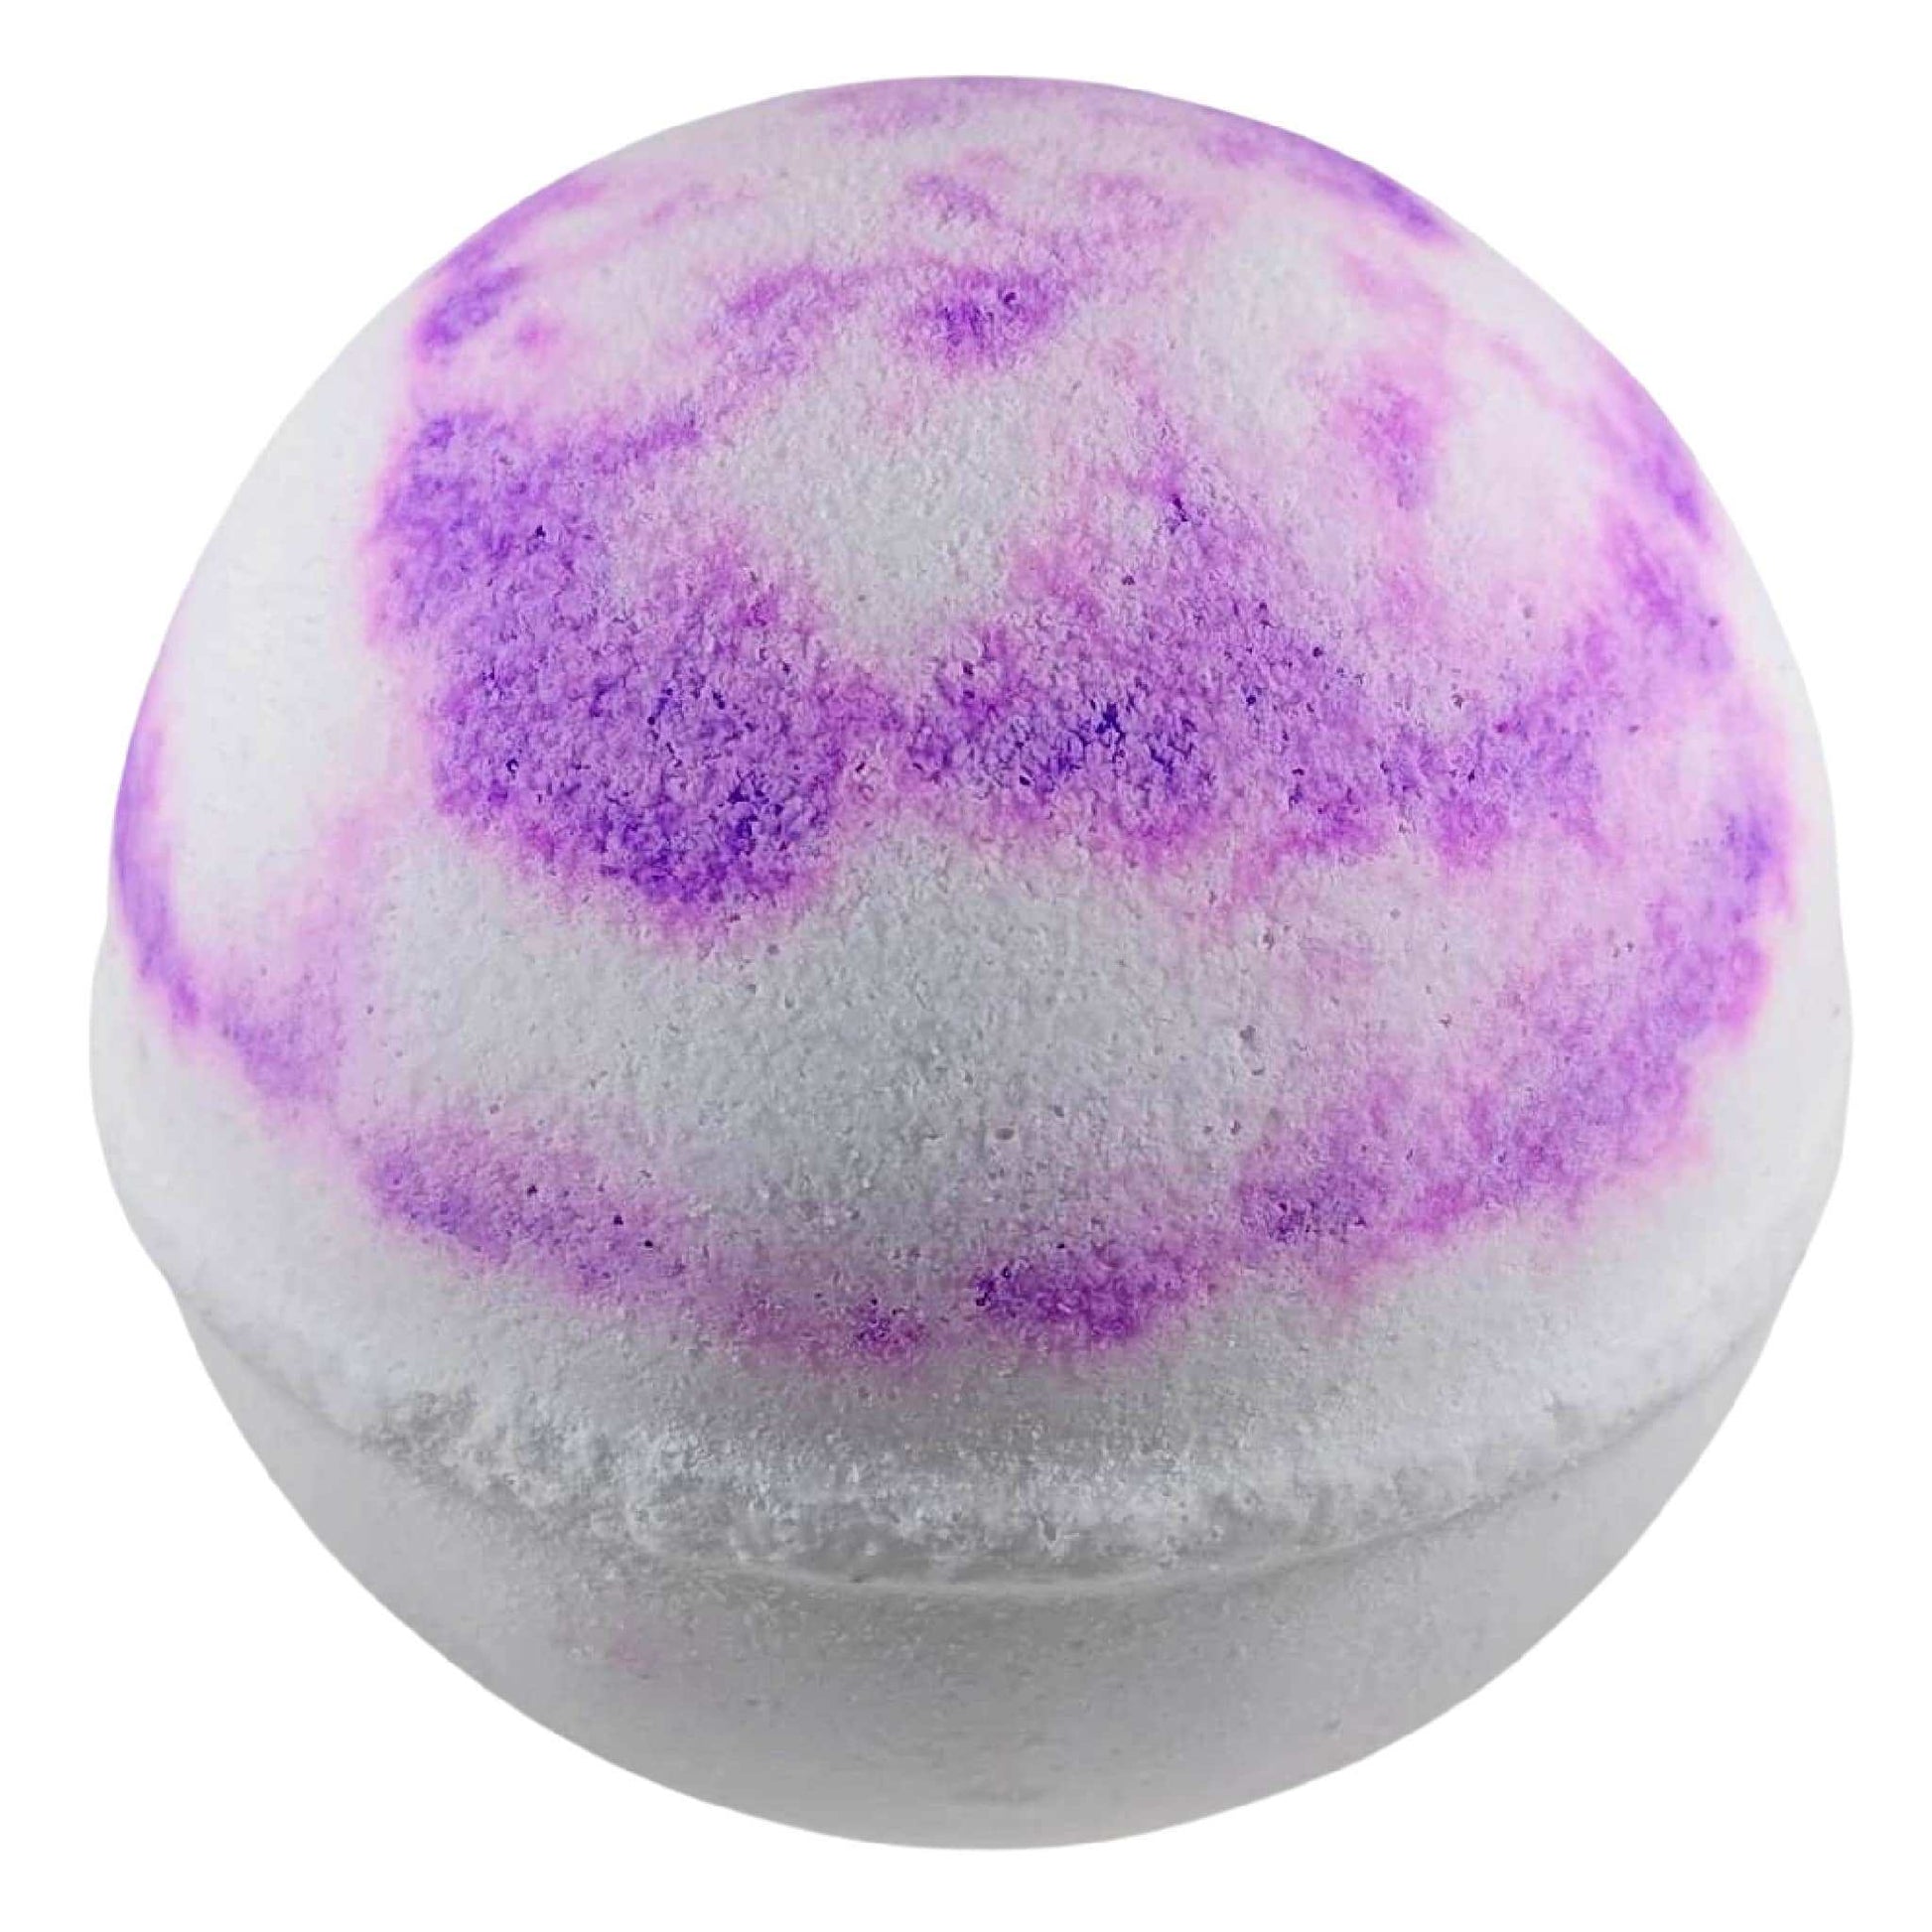 Promote restful sleep with our Aromatherapy Bath Bomb, fused with relaxing sea minerals. Dive into serenity today!